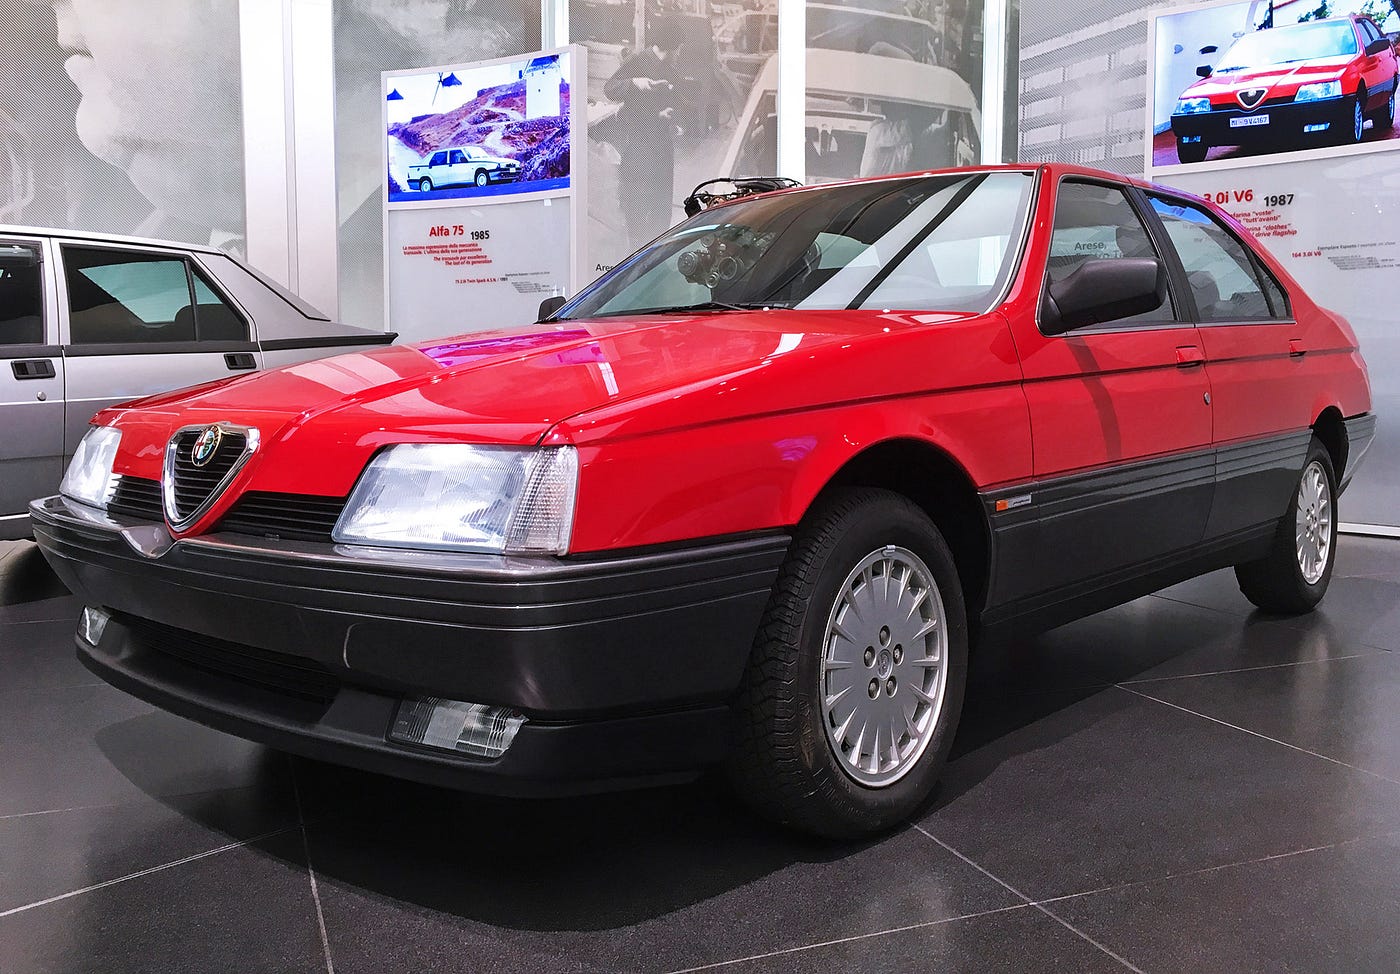 5 Things You Didn't Know About The Alfa Romeo 164 | by Matteo Licata |  Roadster Life | Medium